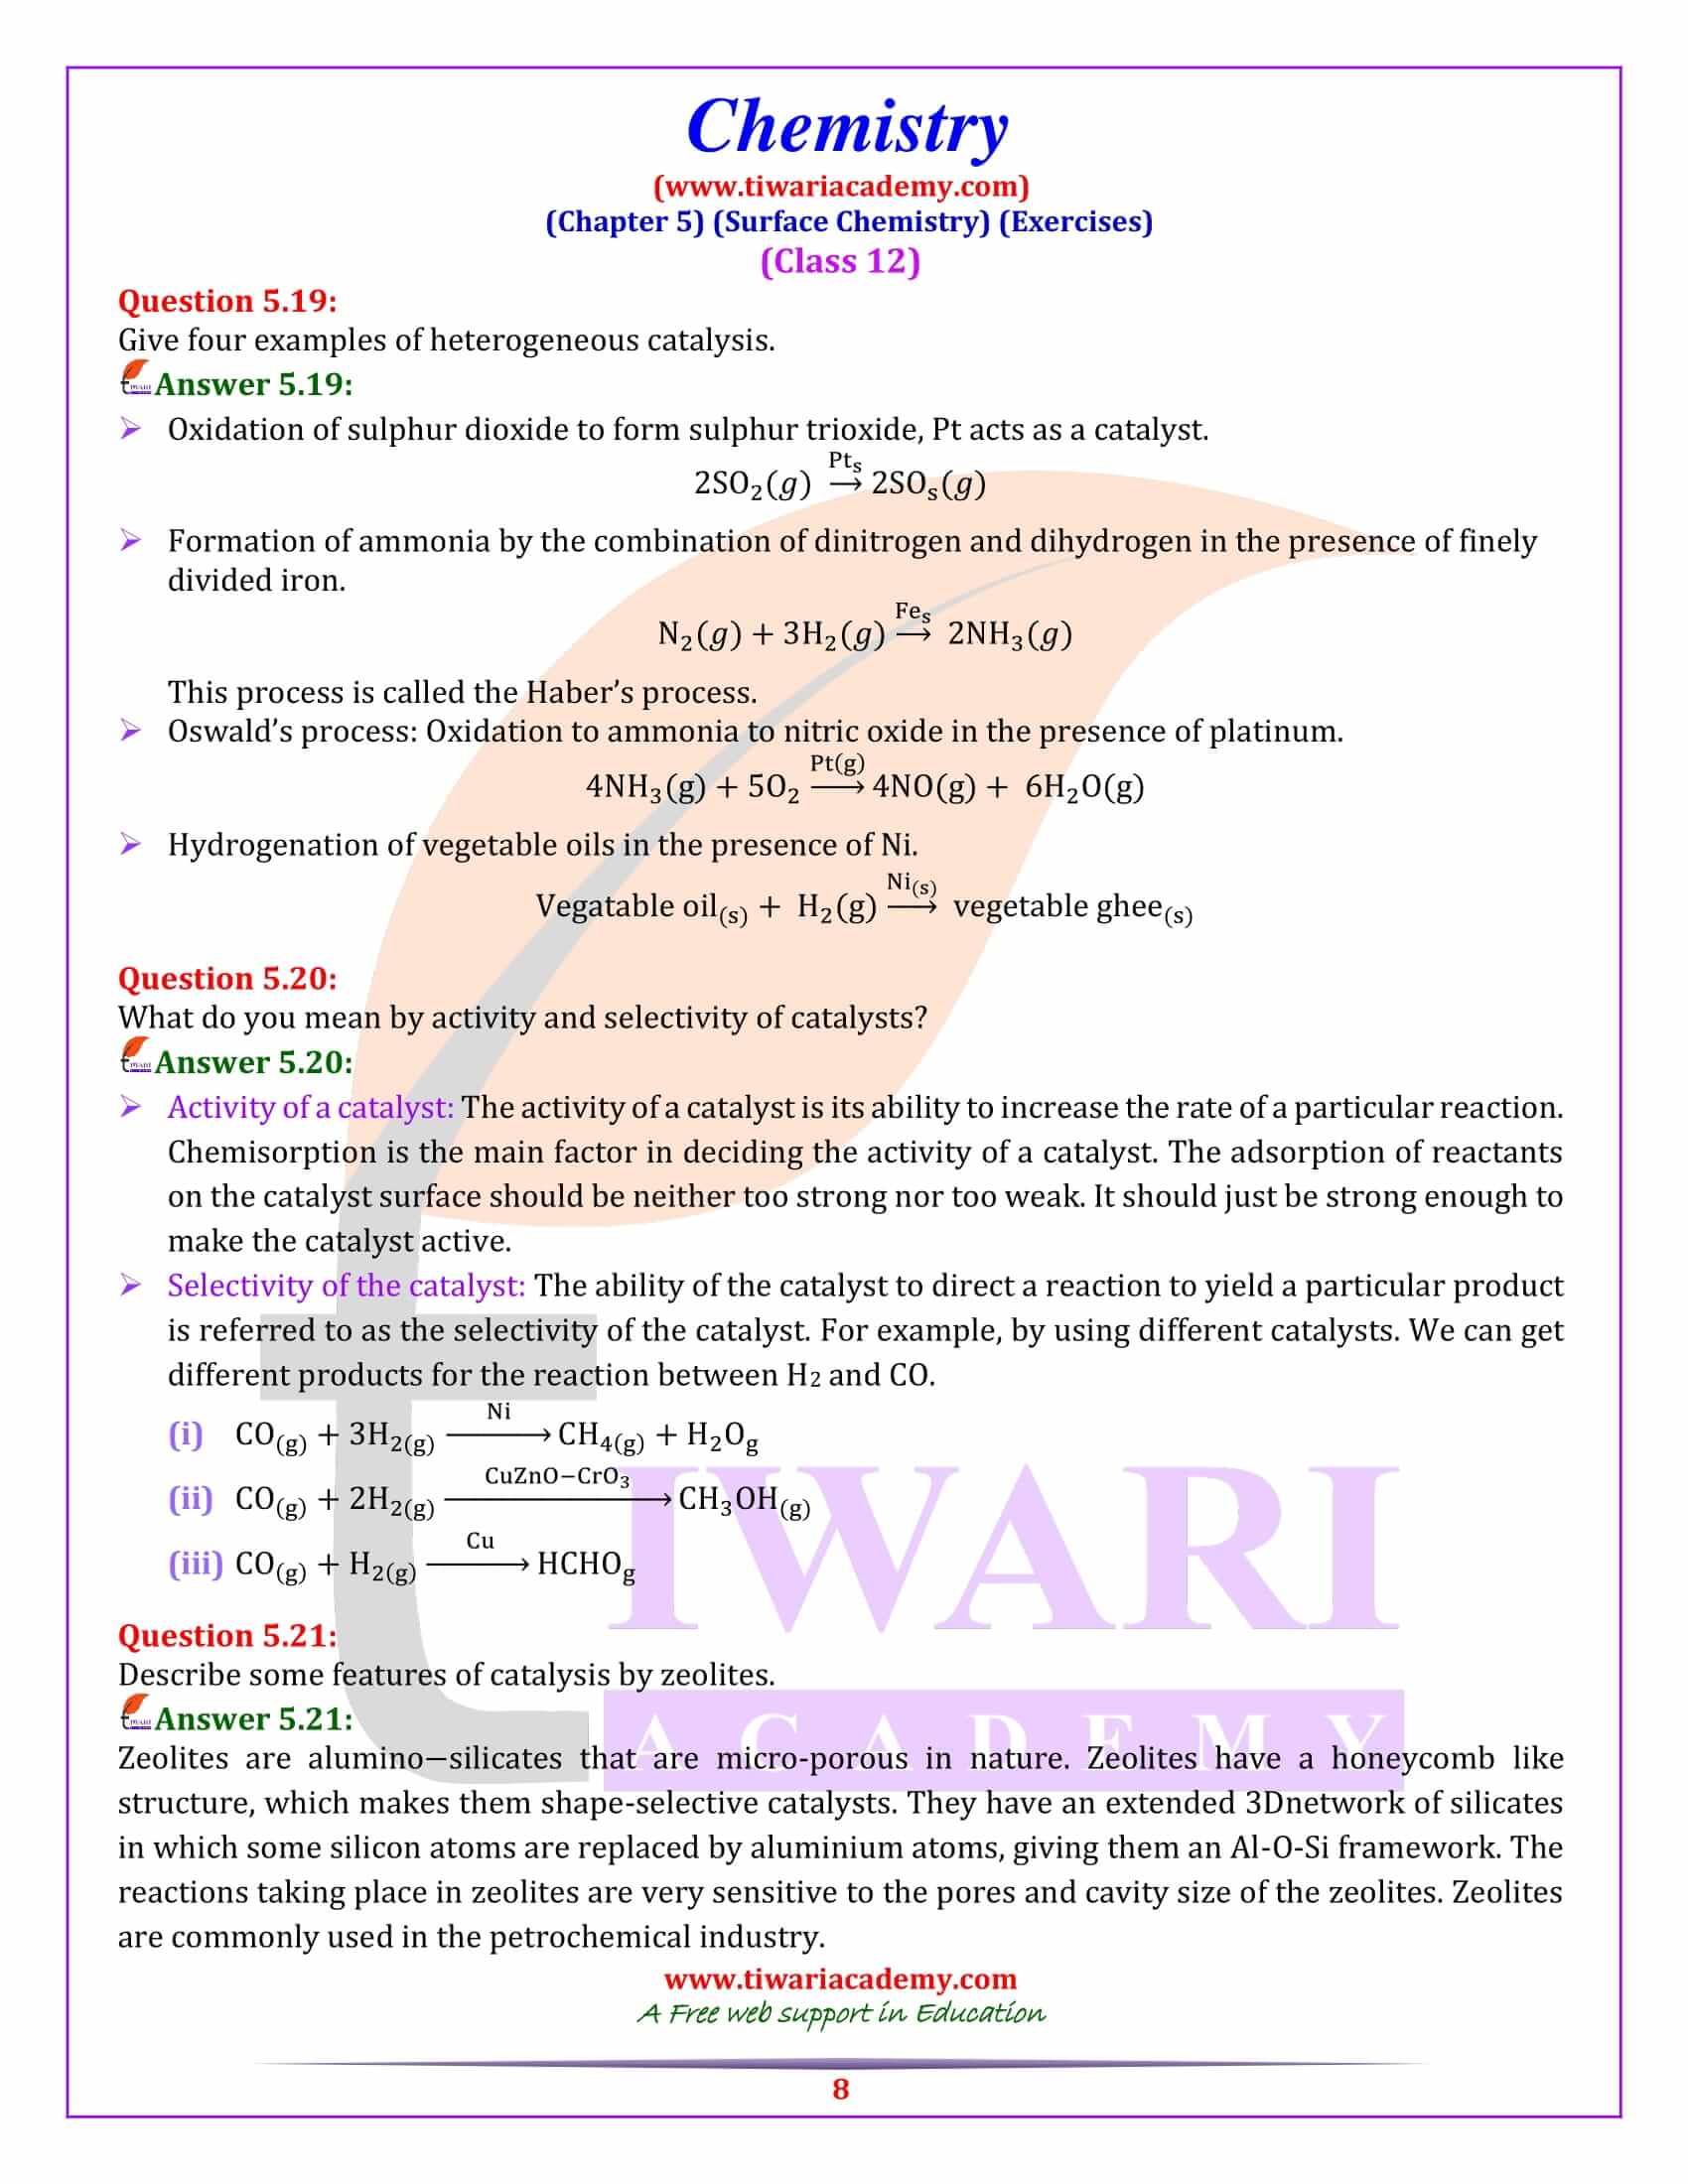 NCERT Solutions for Class 12 Chemistry Chapter 5 pdf download